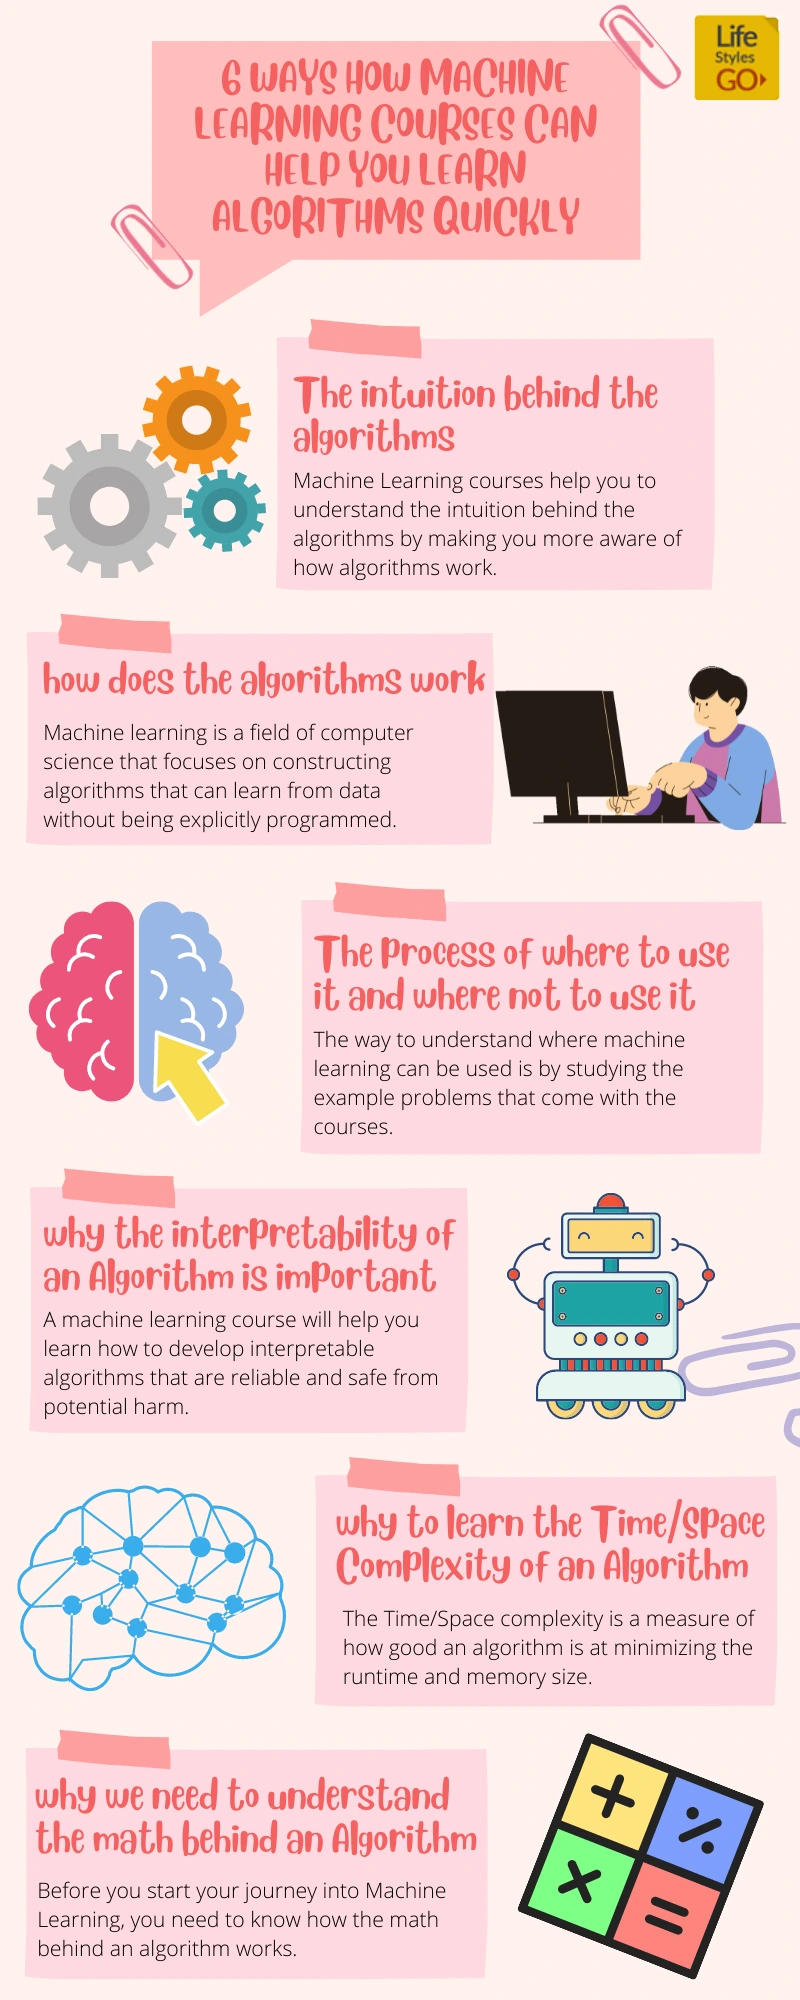 6 Amazing Machine Learning Courses That Will Help You Learn Algorithms Quickly Infographic